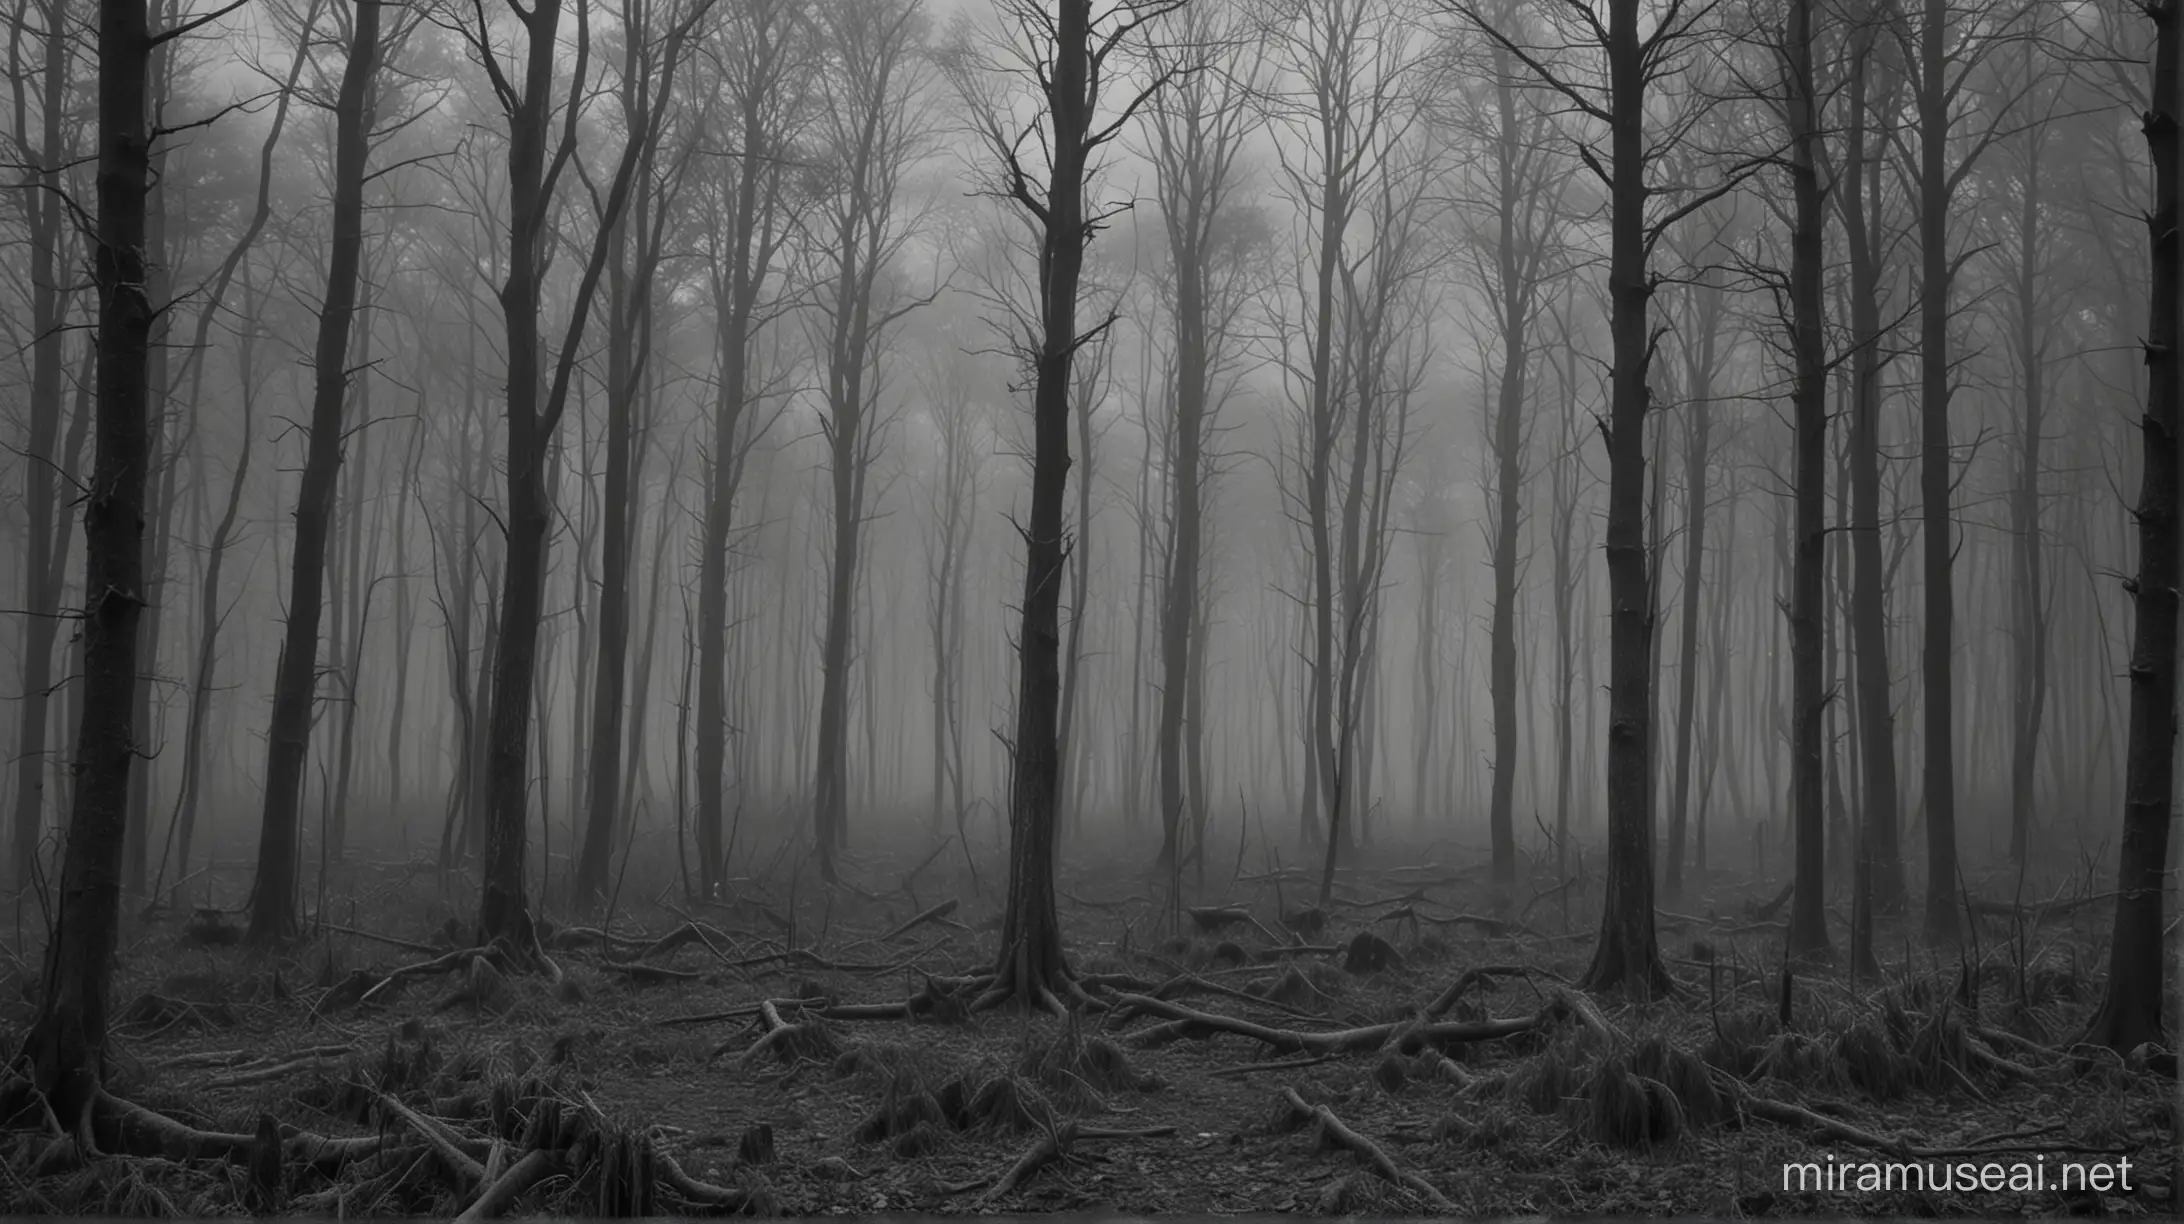 Eerie Forest in Monochrome Mysterious Woods with a Sense of Horror